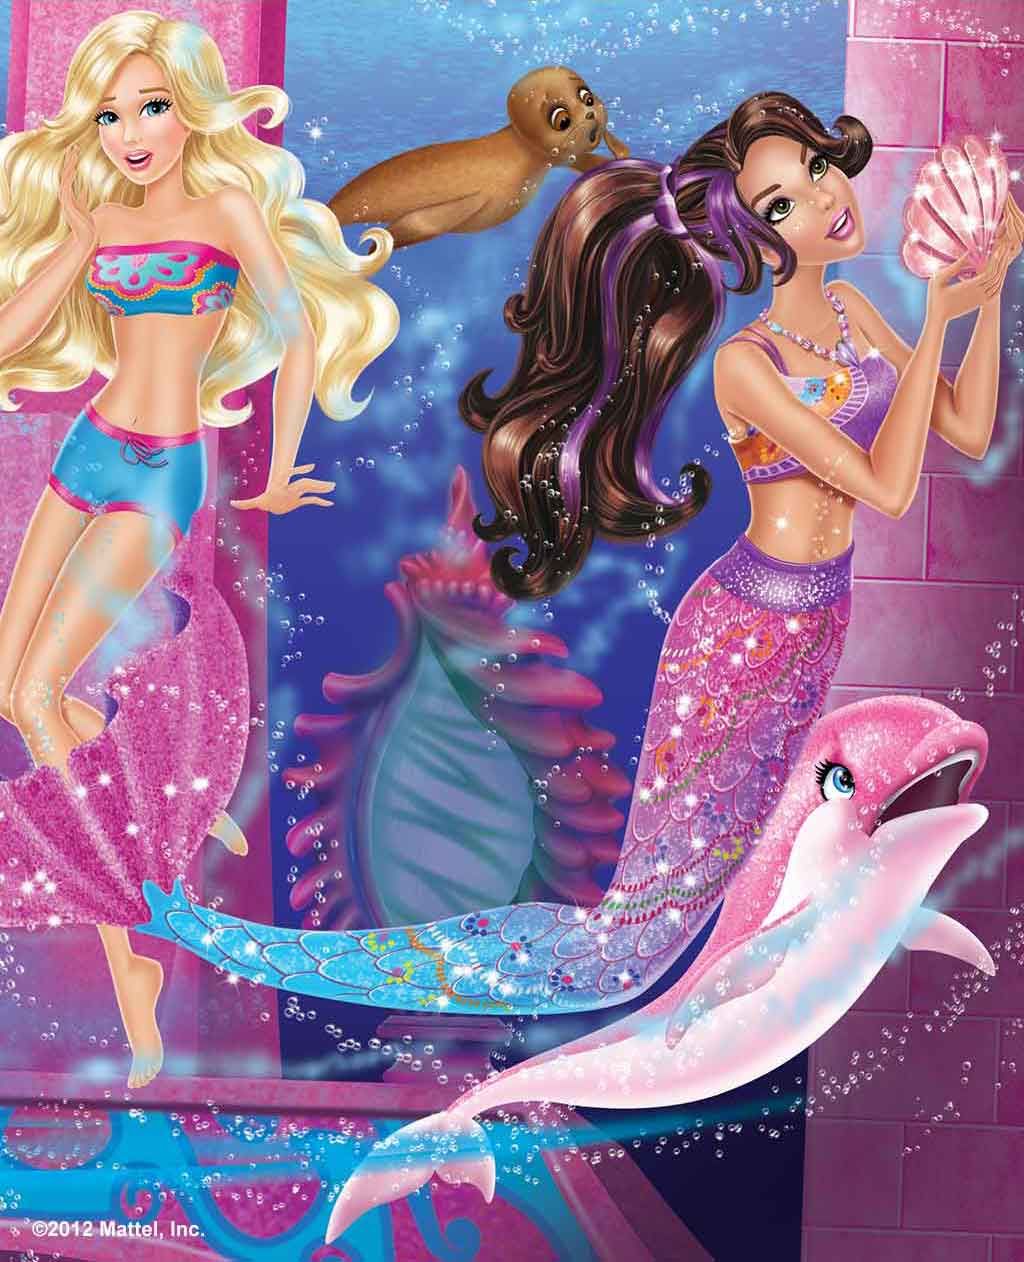 Magical barbie as a mermaid- video toy review!. Mermaid barbie, Mermaid tale, Mermaid cartoon